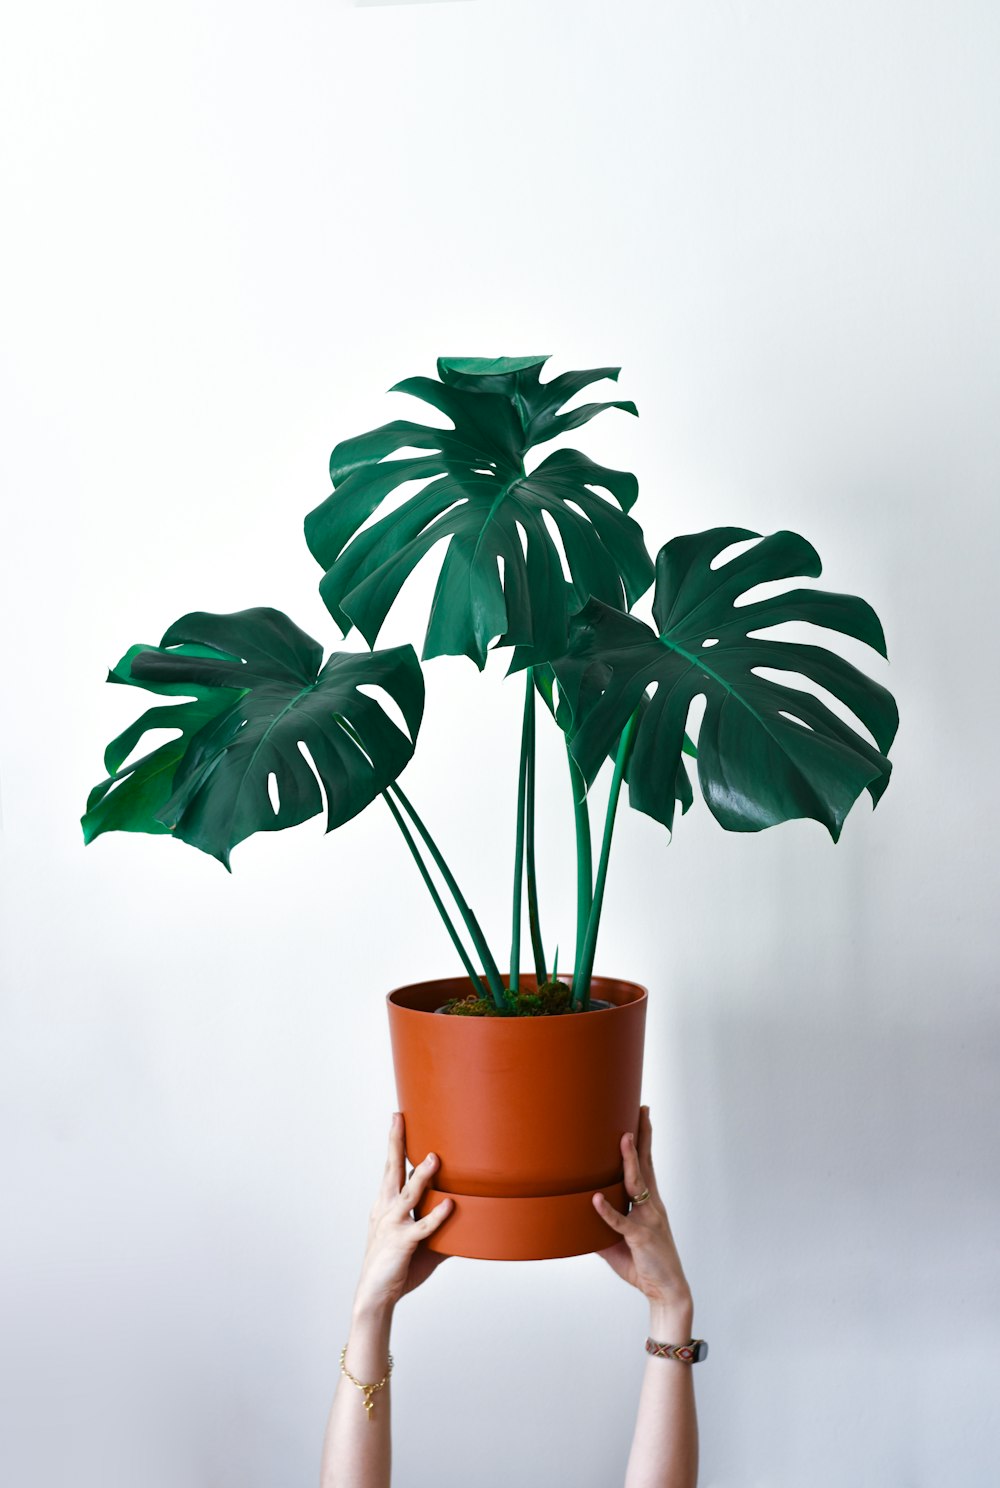 a person holding a potted plant with large green leaves